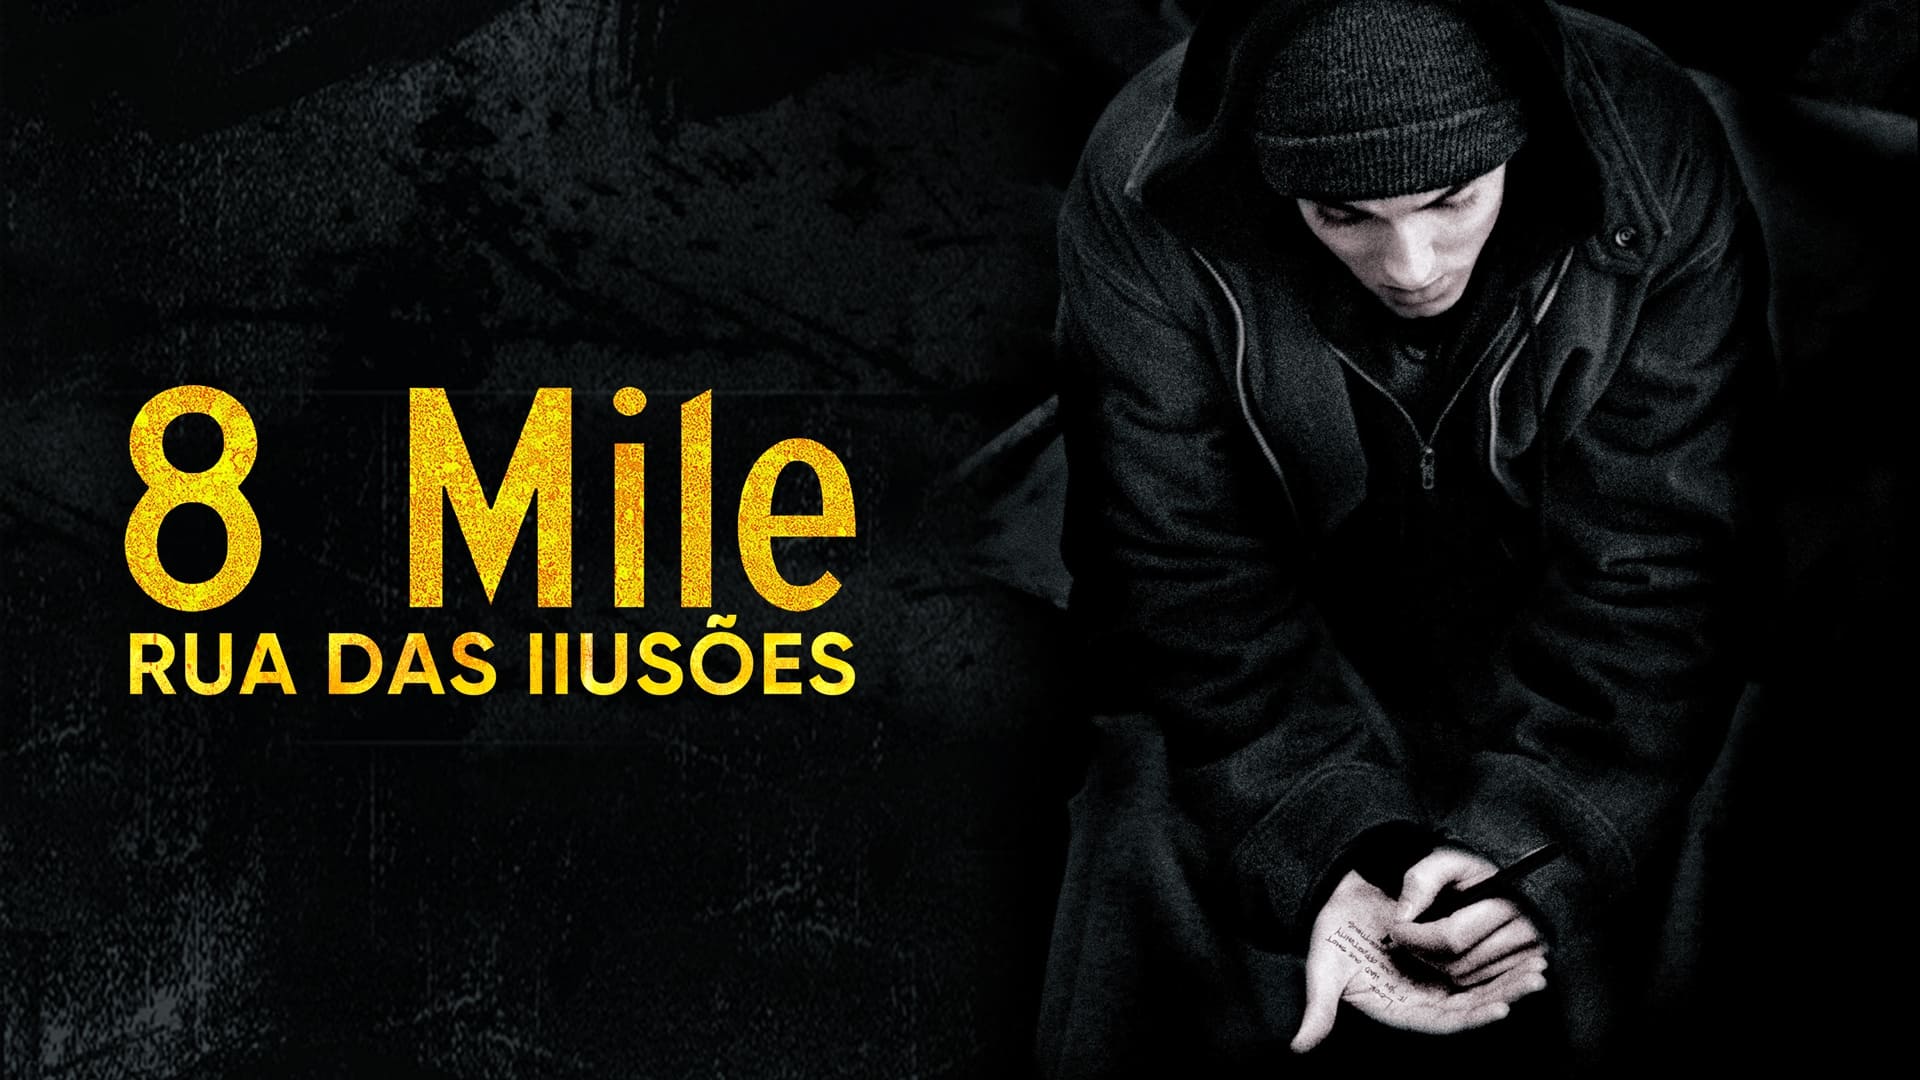 Watch 8 Mile (2002) : Full Movie Online In HD Quality For Jimmy Smith, Jr